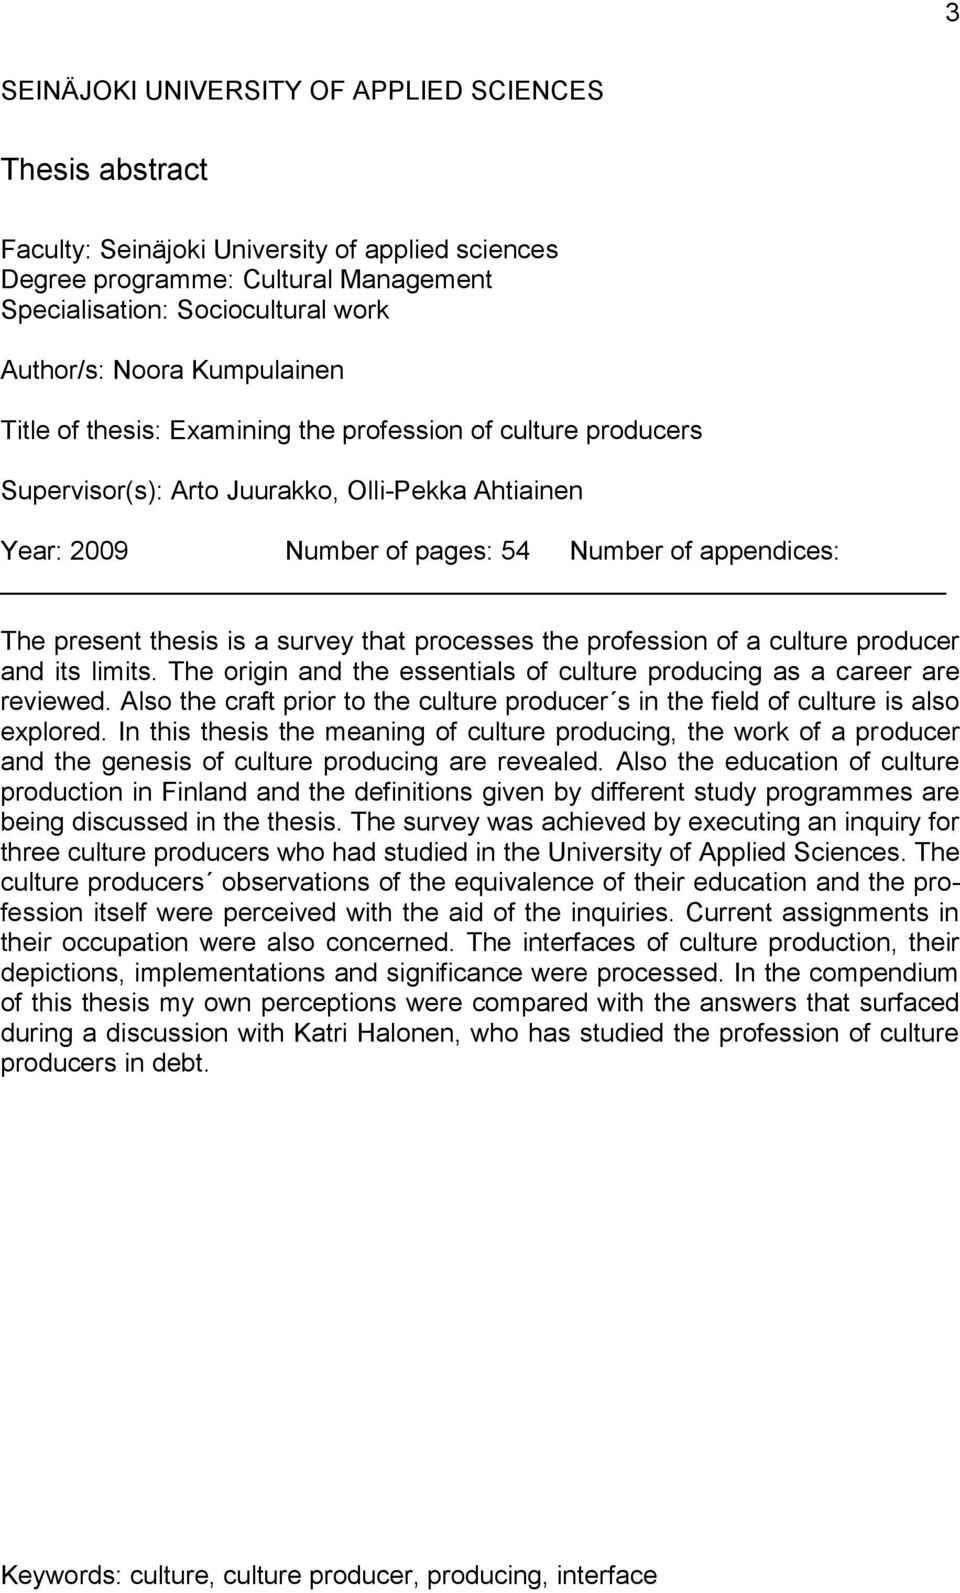 is a survey that processes the profession of a culture producer and its limits. The origin and the essentials of culture producing as a career are reviewed.